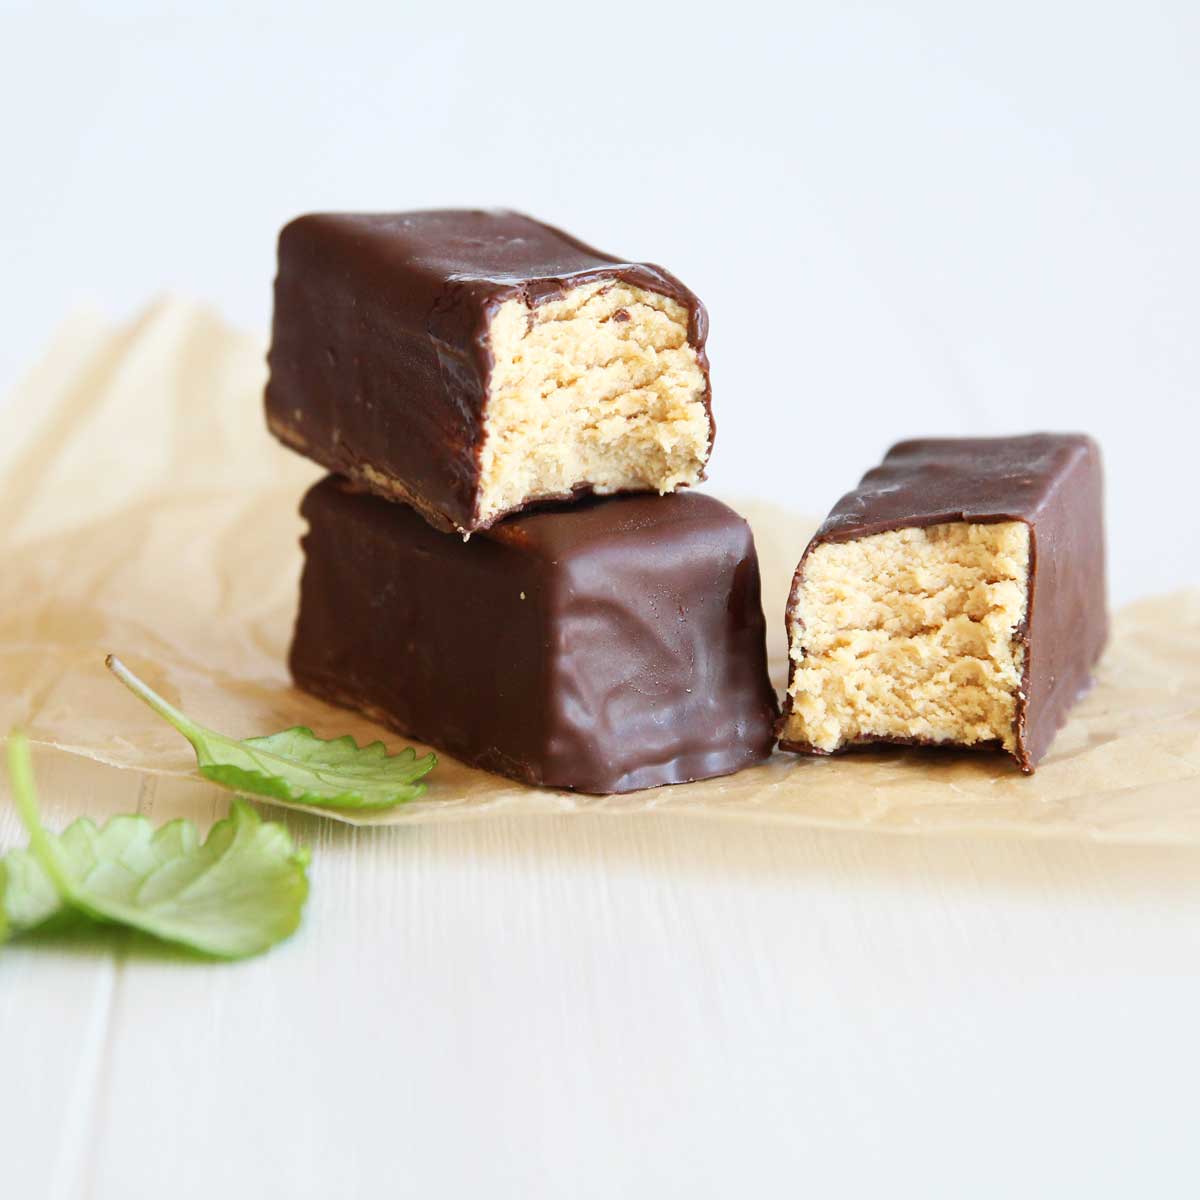 Simple Greek Yogurt Peanut Butter Protein Bars to eat for Breakfast or Post-Workout - yeast bread